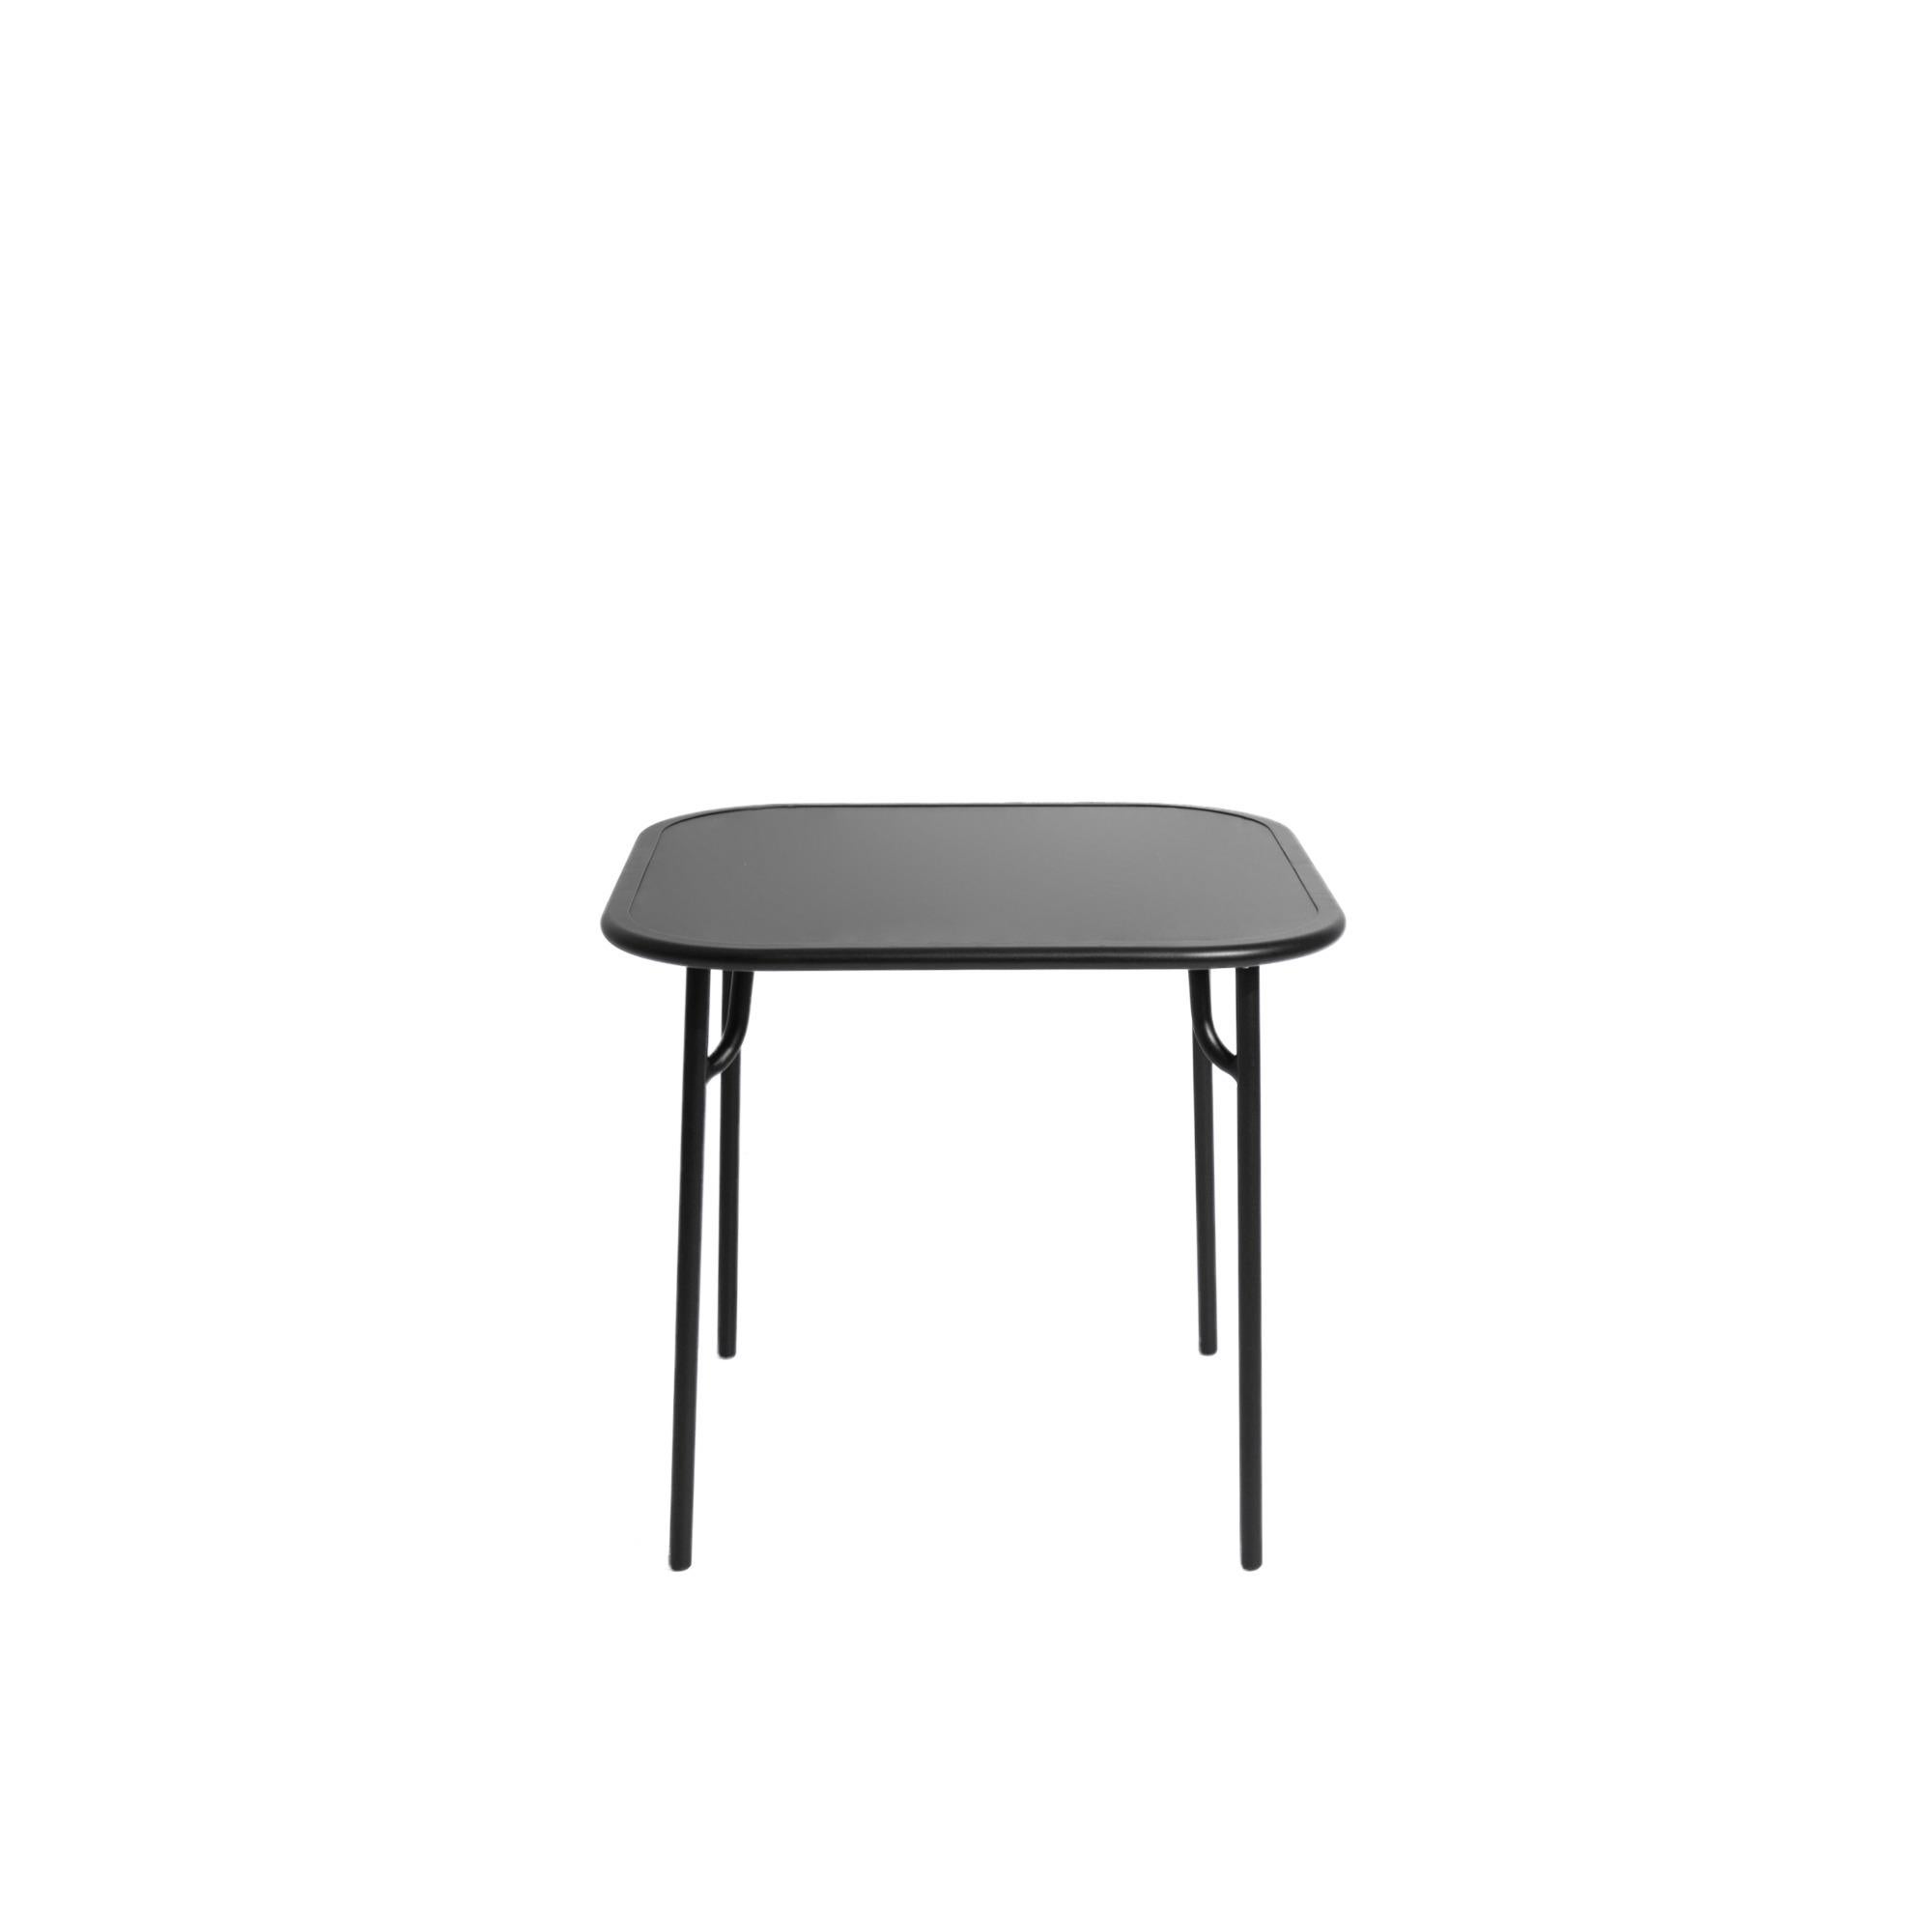 Petite Friture Week-End Plain Square Dining Table in Black Aluminium by Studio BrichetZiegler, 2017

The week-end collection is a full range of outdoor furniture, in aluminium grained epoxy paint, matt finish, that includes 18 functions and 8